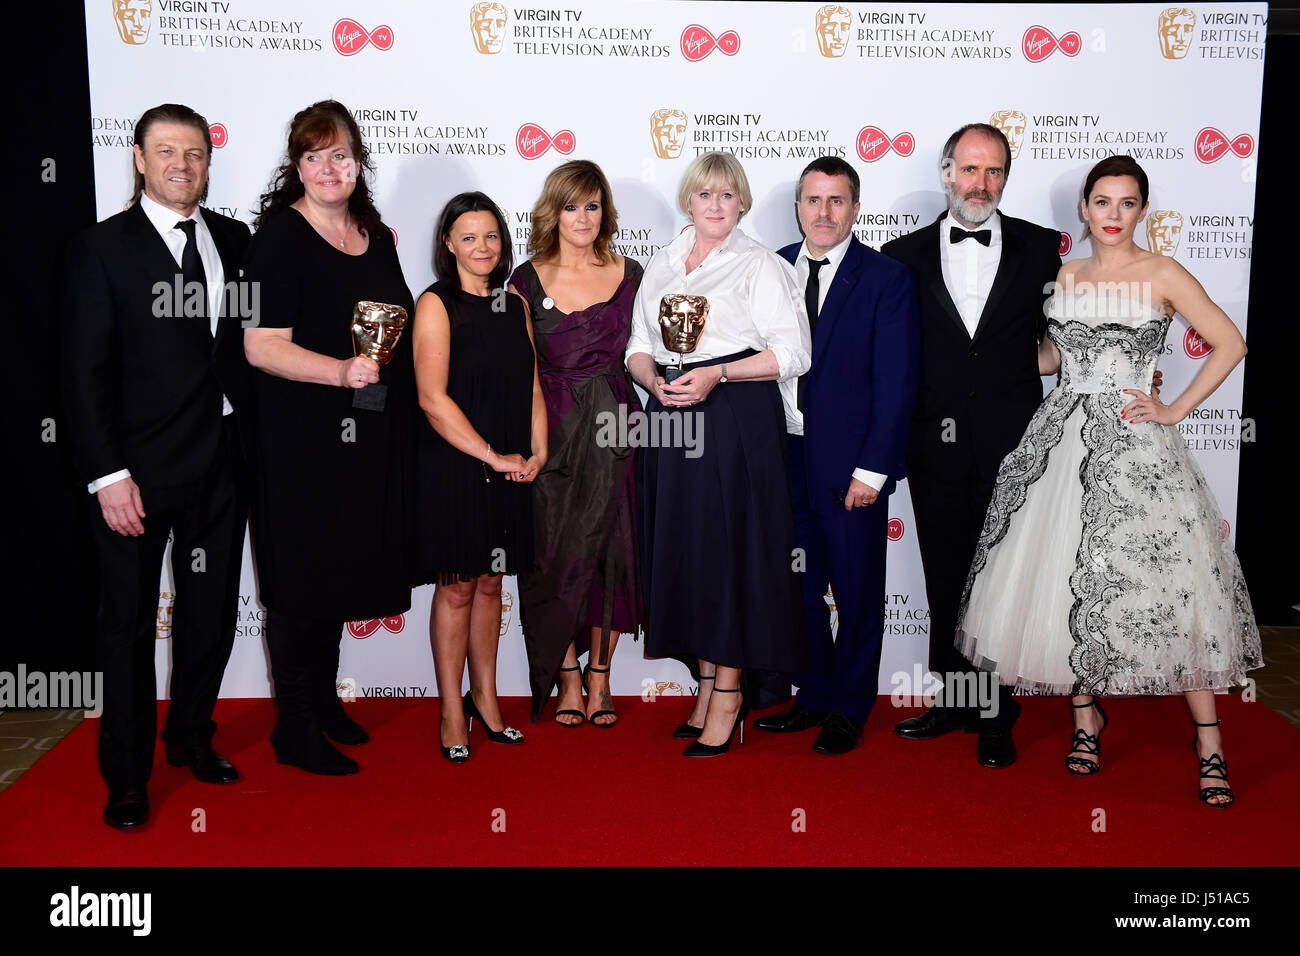 Best Drama Series Winners Happy Valley with Sally Wainwright, Juliet Charlesworth, Nicola Shindler and Neasa Hardiman in the press room with Sean Bean and Anna Friel at the Virgin TV British Academy Television Awards 2017 held at Festival Hall at Southbank Centre, London. PRESS ASSOCIATION Photo. Picture date: Sunday May 14, 2017. See PA story SHOWBIZ Bafta. Photo credit should read: Ian West/PA Wire Stock Photo